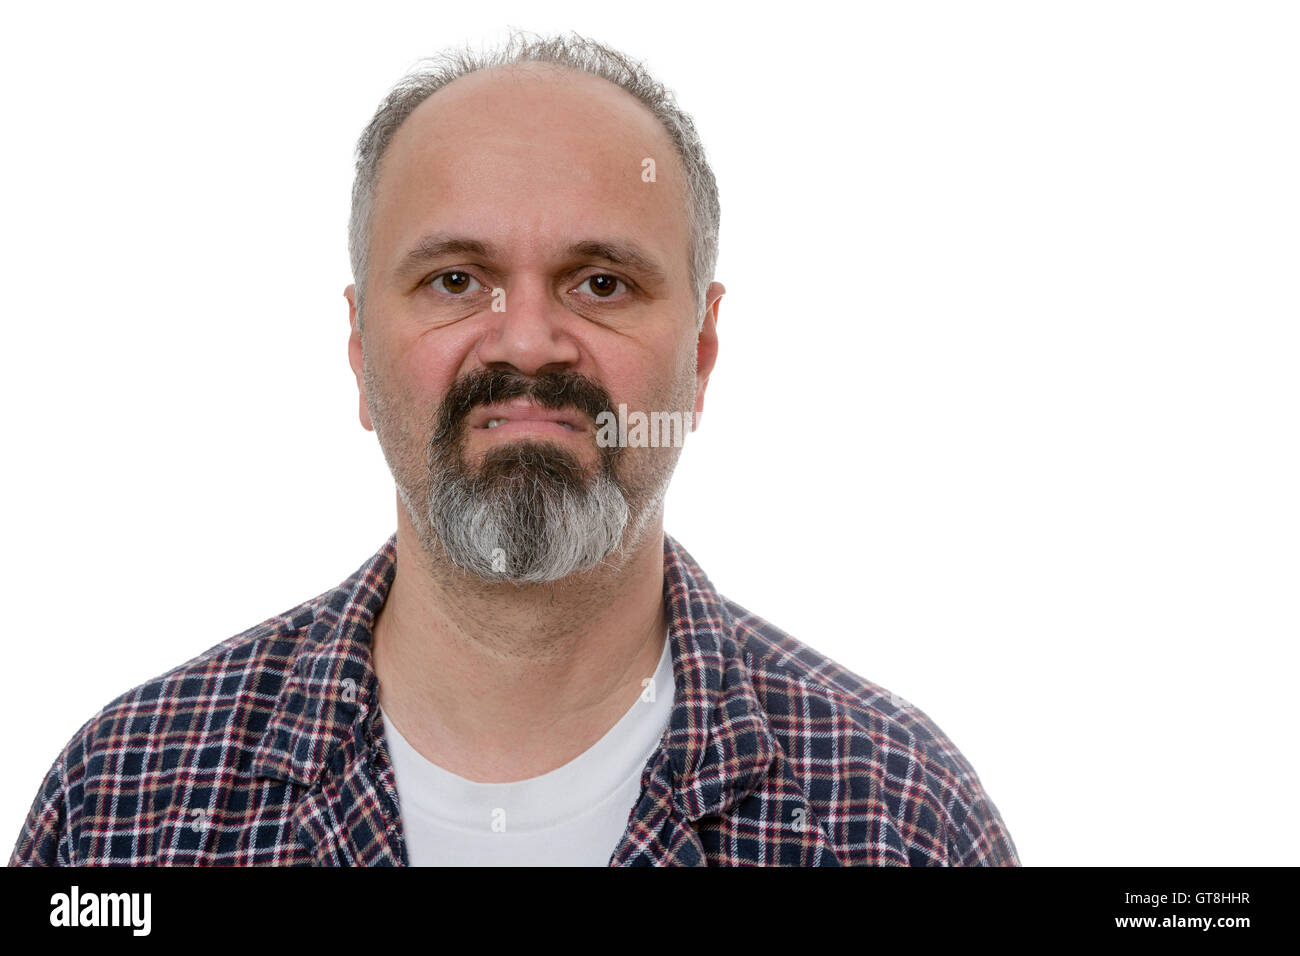 Single balding grumpy old man in beard, mustache and plaid pyjamas with angry expression over white undershirt Stock Photo